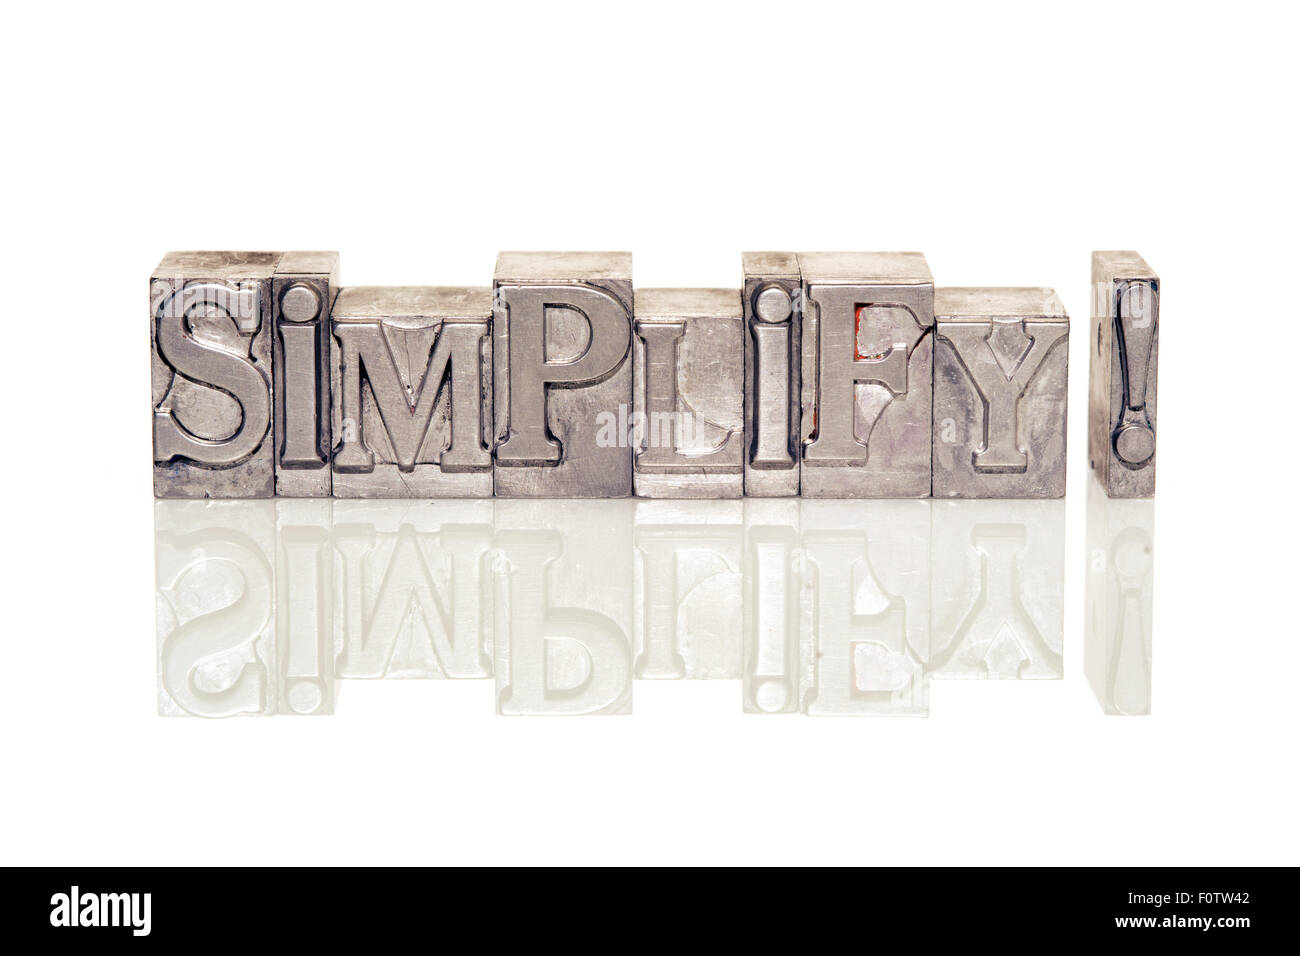 simplify exclamation made from metallic letterpress type on reflective surface Stock Photo